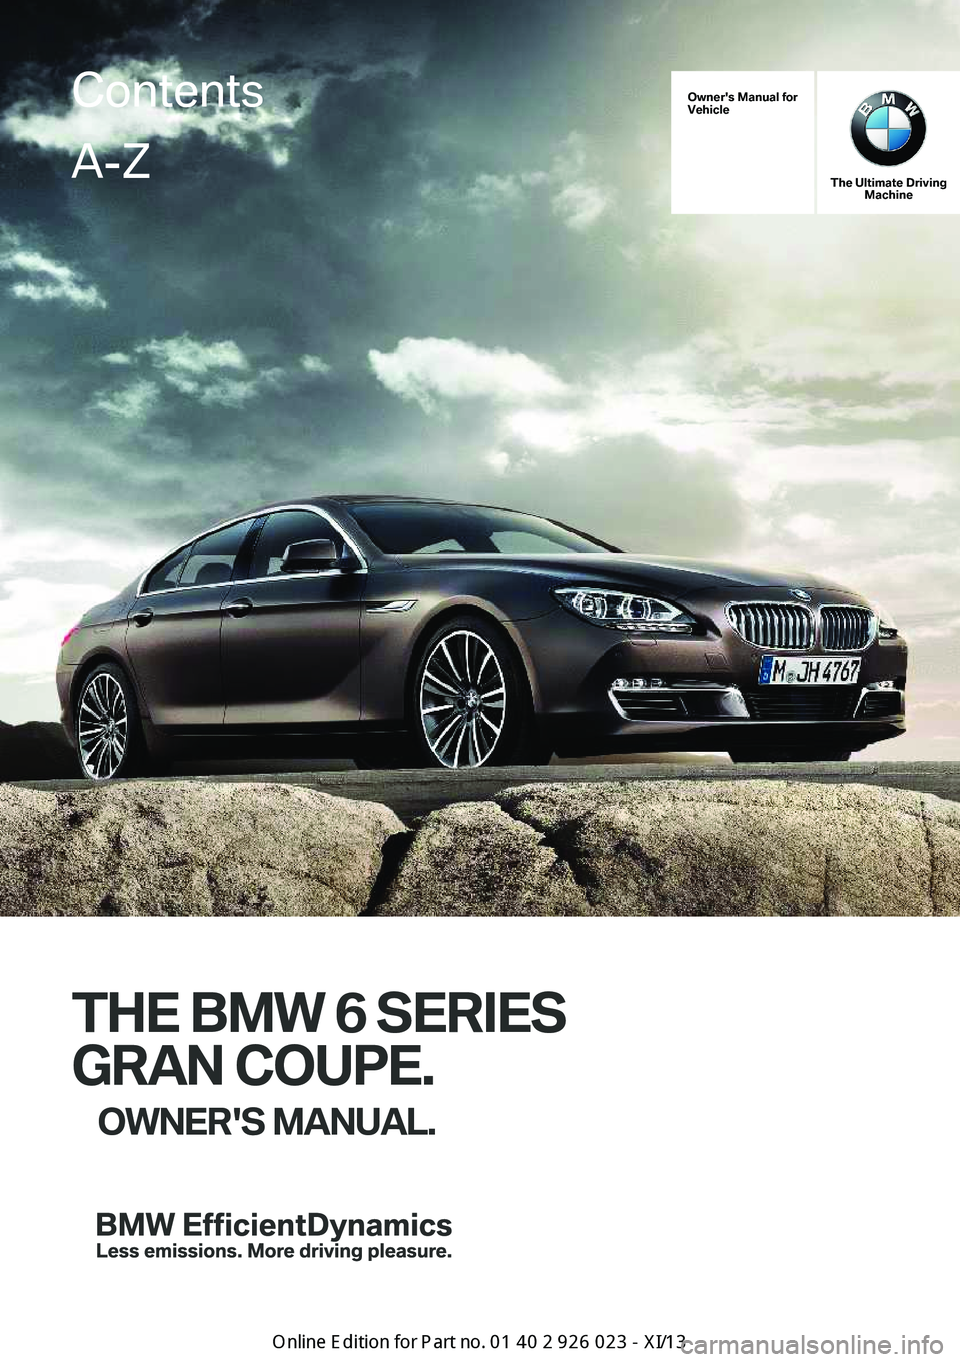 BMW 6 SERIES GRAN COUPE 2013 F06 Owners Manual Owner's Manual for
Vehicle
The Ultimate Driving Machine
THE BMW 6 SERIES
GRAN COUPE. OWNER'S MANUAL.
ContentsA-Z
Online Edition for Part no. 01 40 2 909 877 - VI/13   